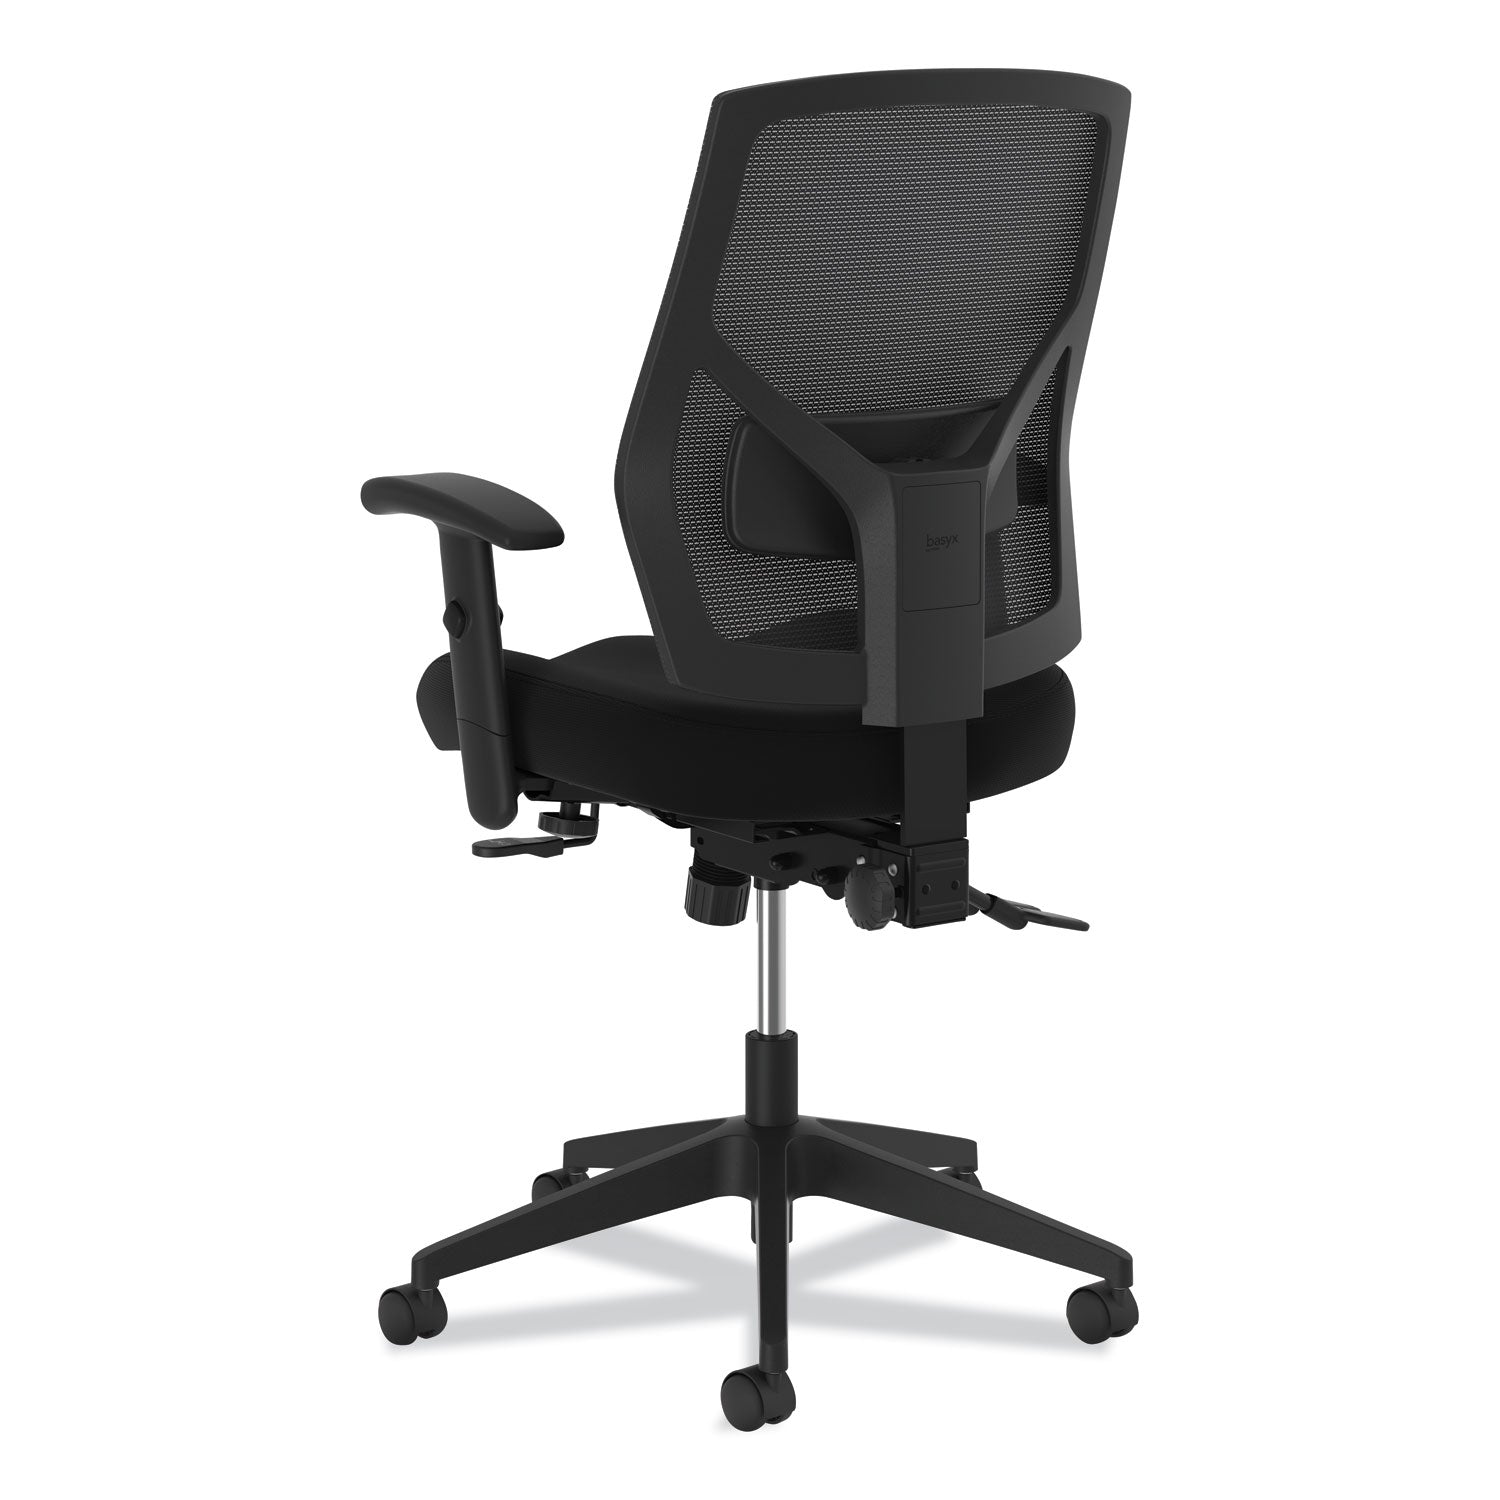 crio-high-back-task-chair-with-asynchronous-control-supports-up-to-250-lb-18-to-22-seat-height-black_bsxvl582sb11t - 5